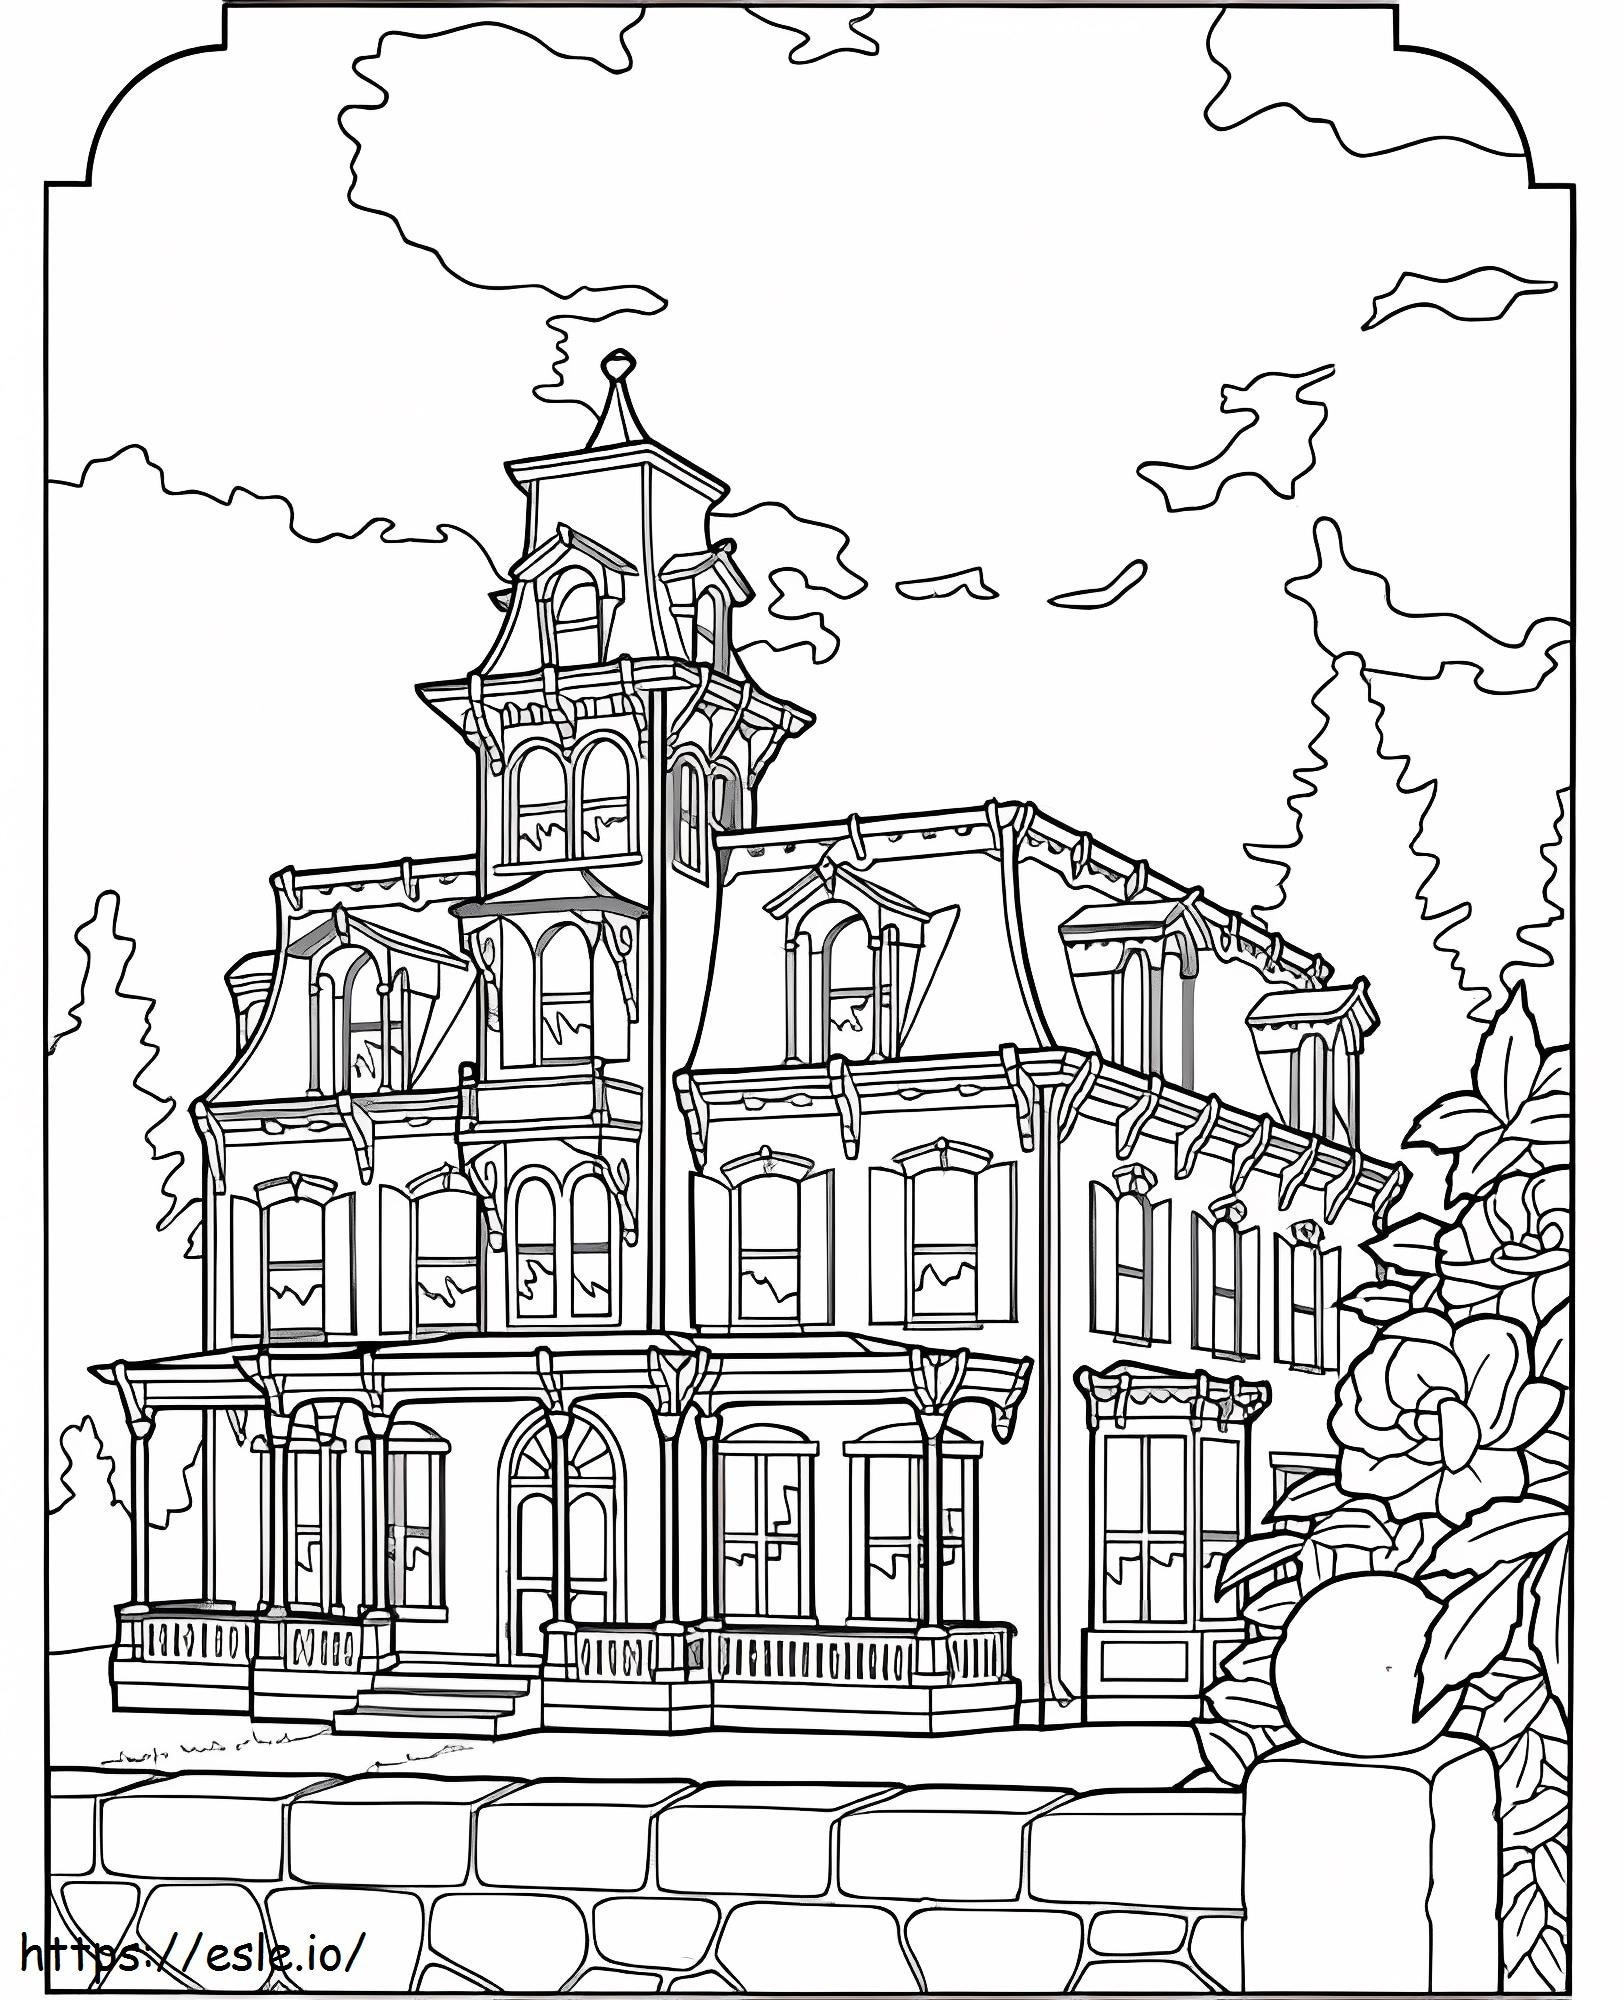 Amazing Mansion coloring page